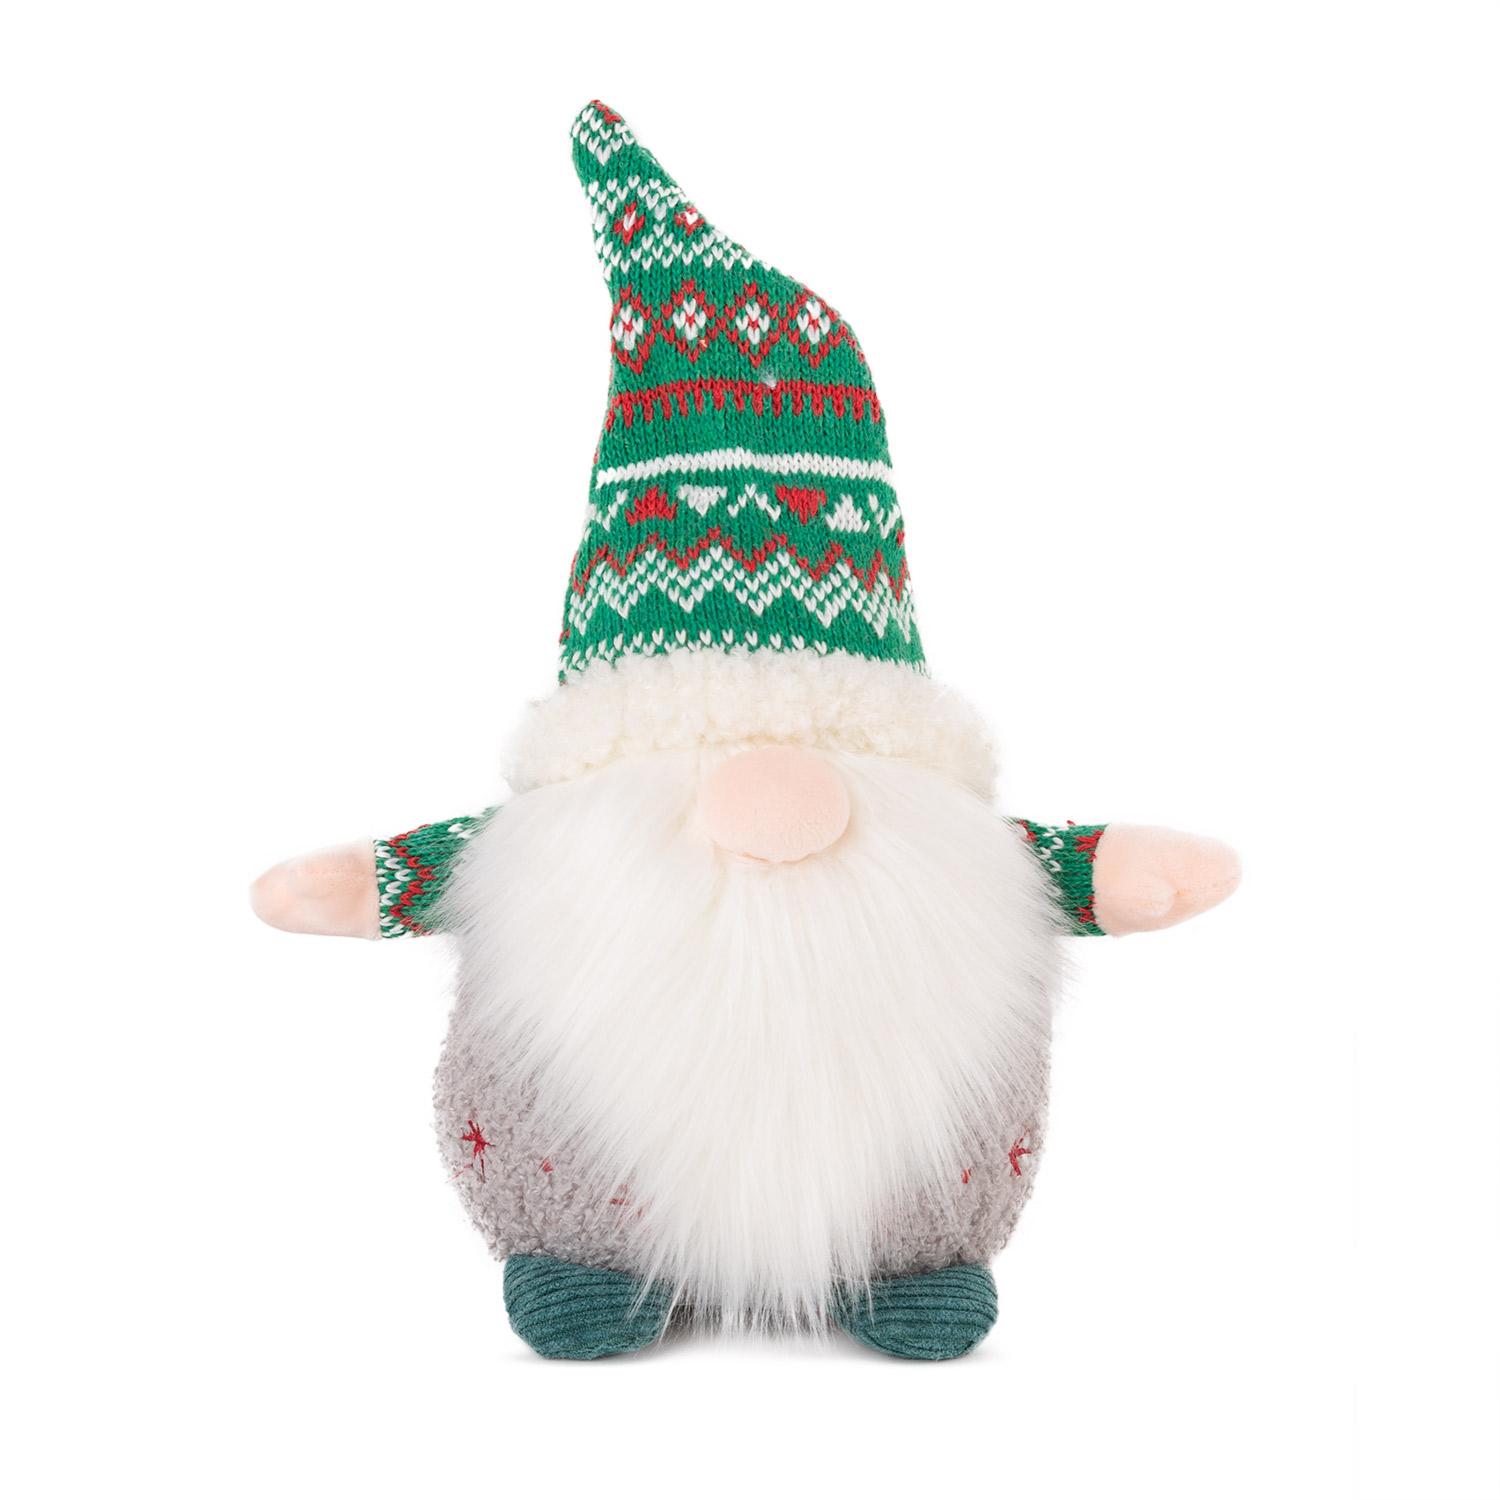 Christmas gnome with green hat